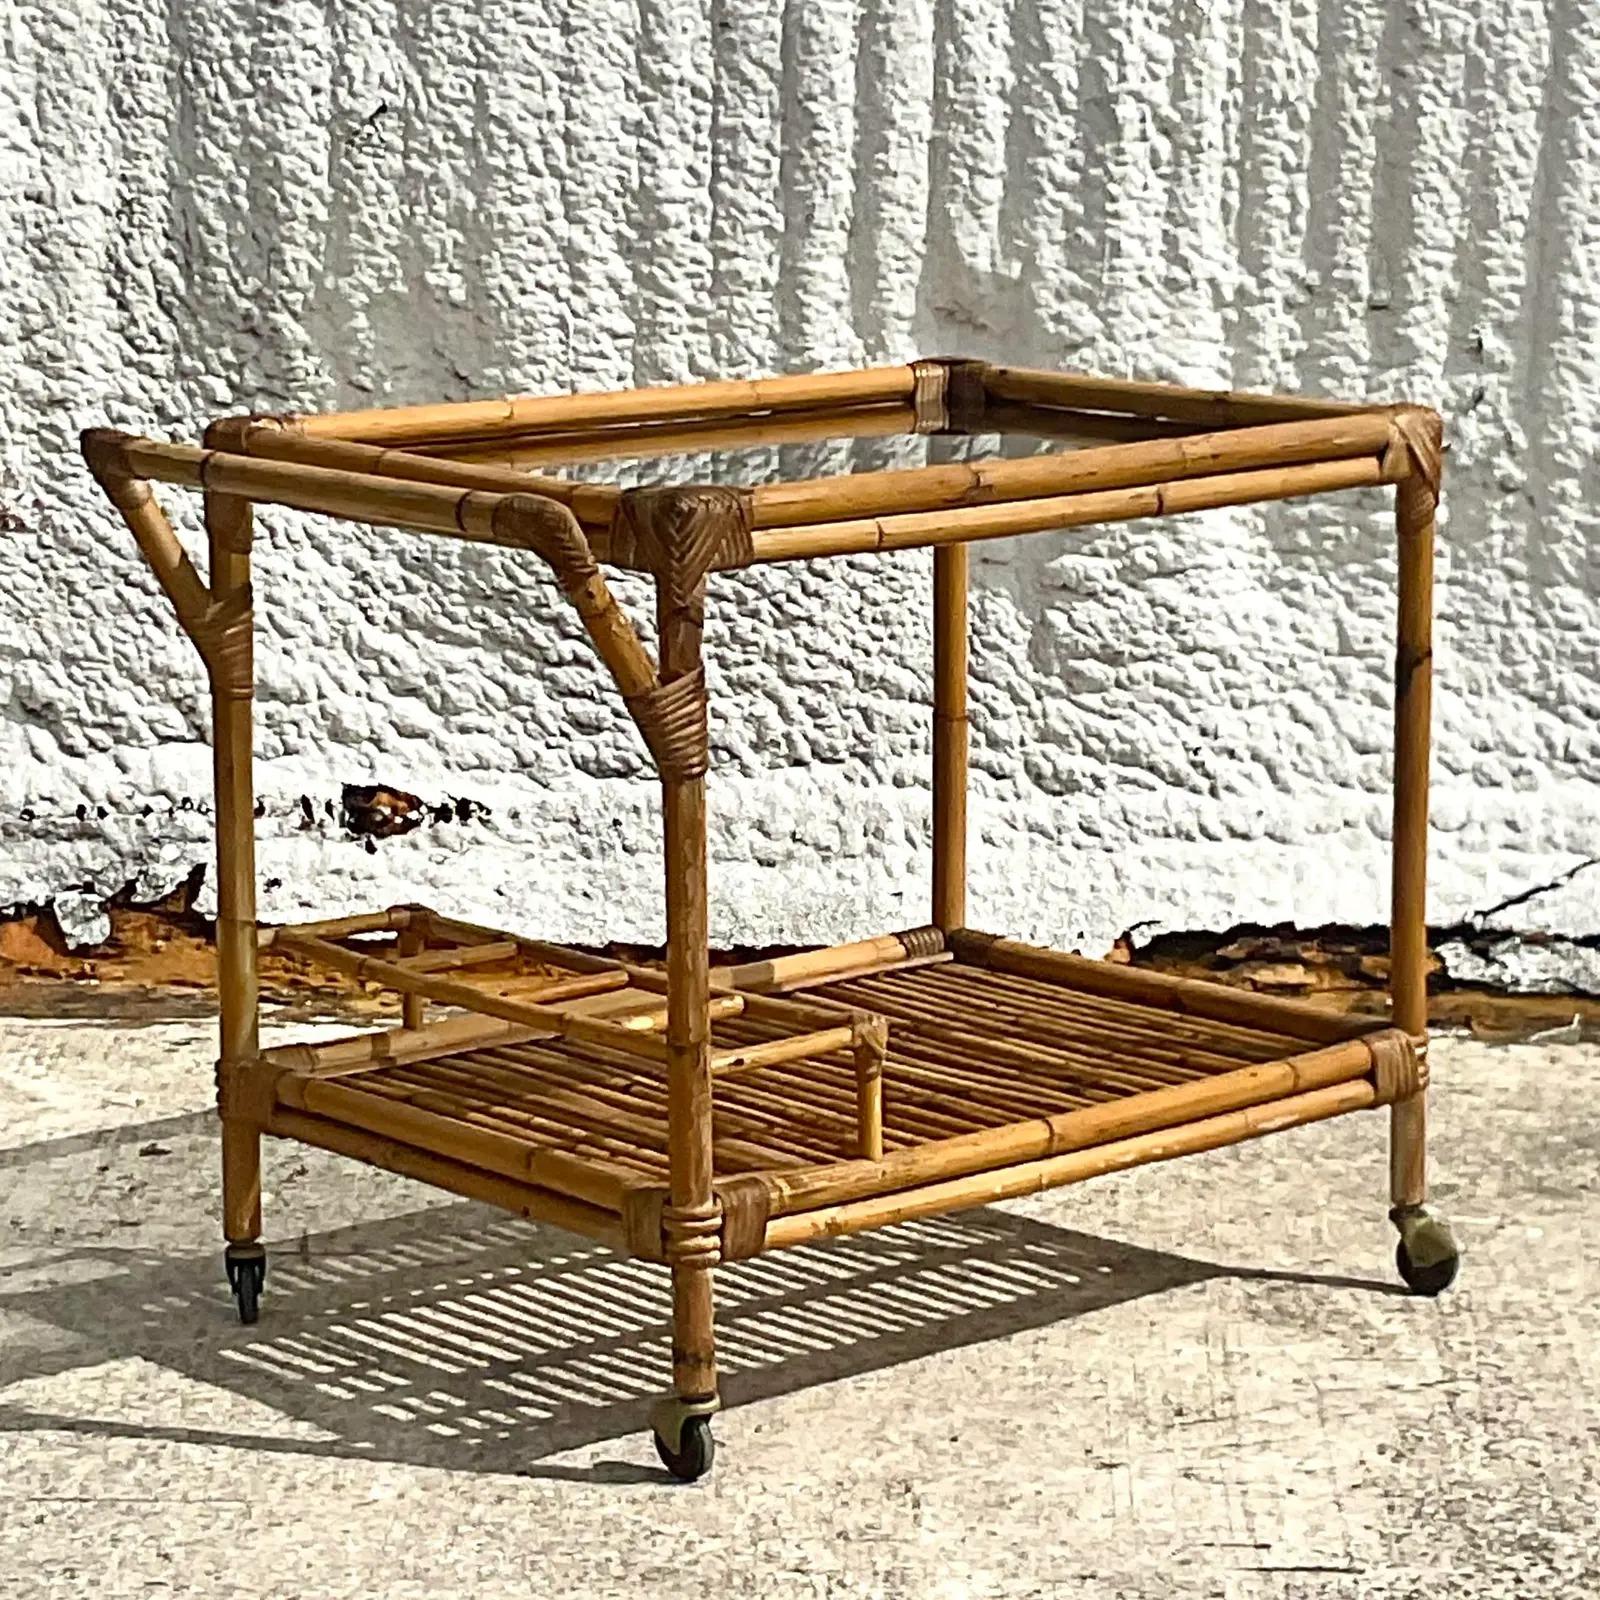 A fantastic vintage coastal bar cart. A chic bamboo construction with caster feet. Inset glass top. Acquired from a Palm Beach estate.